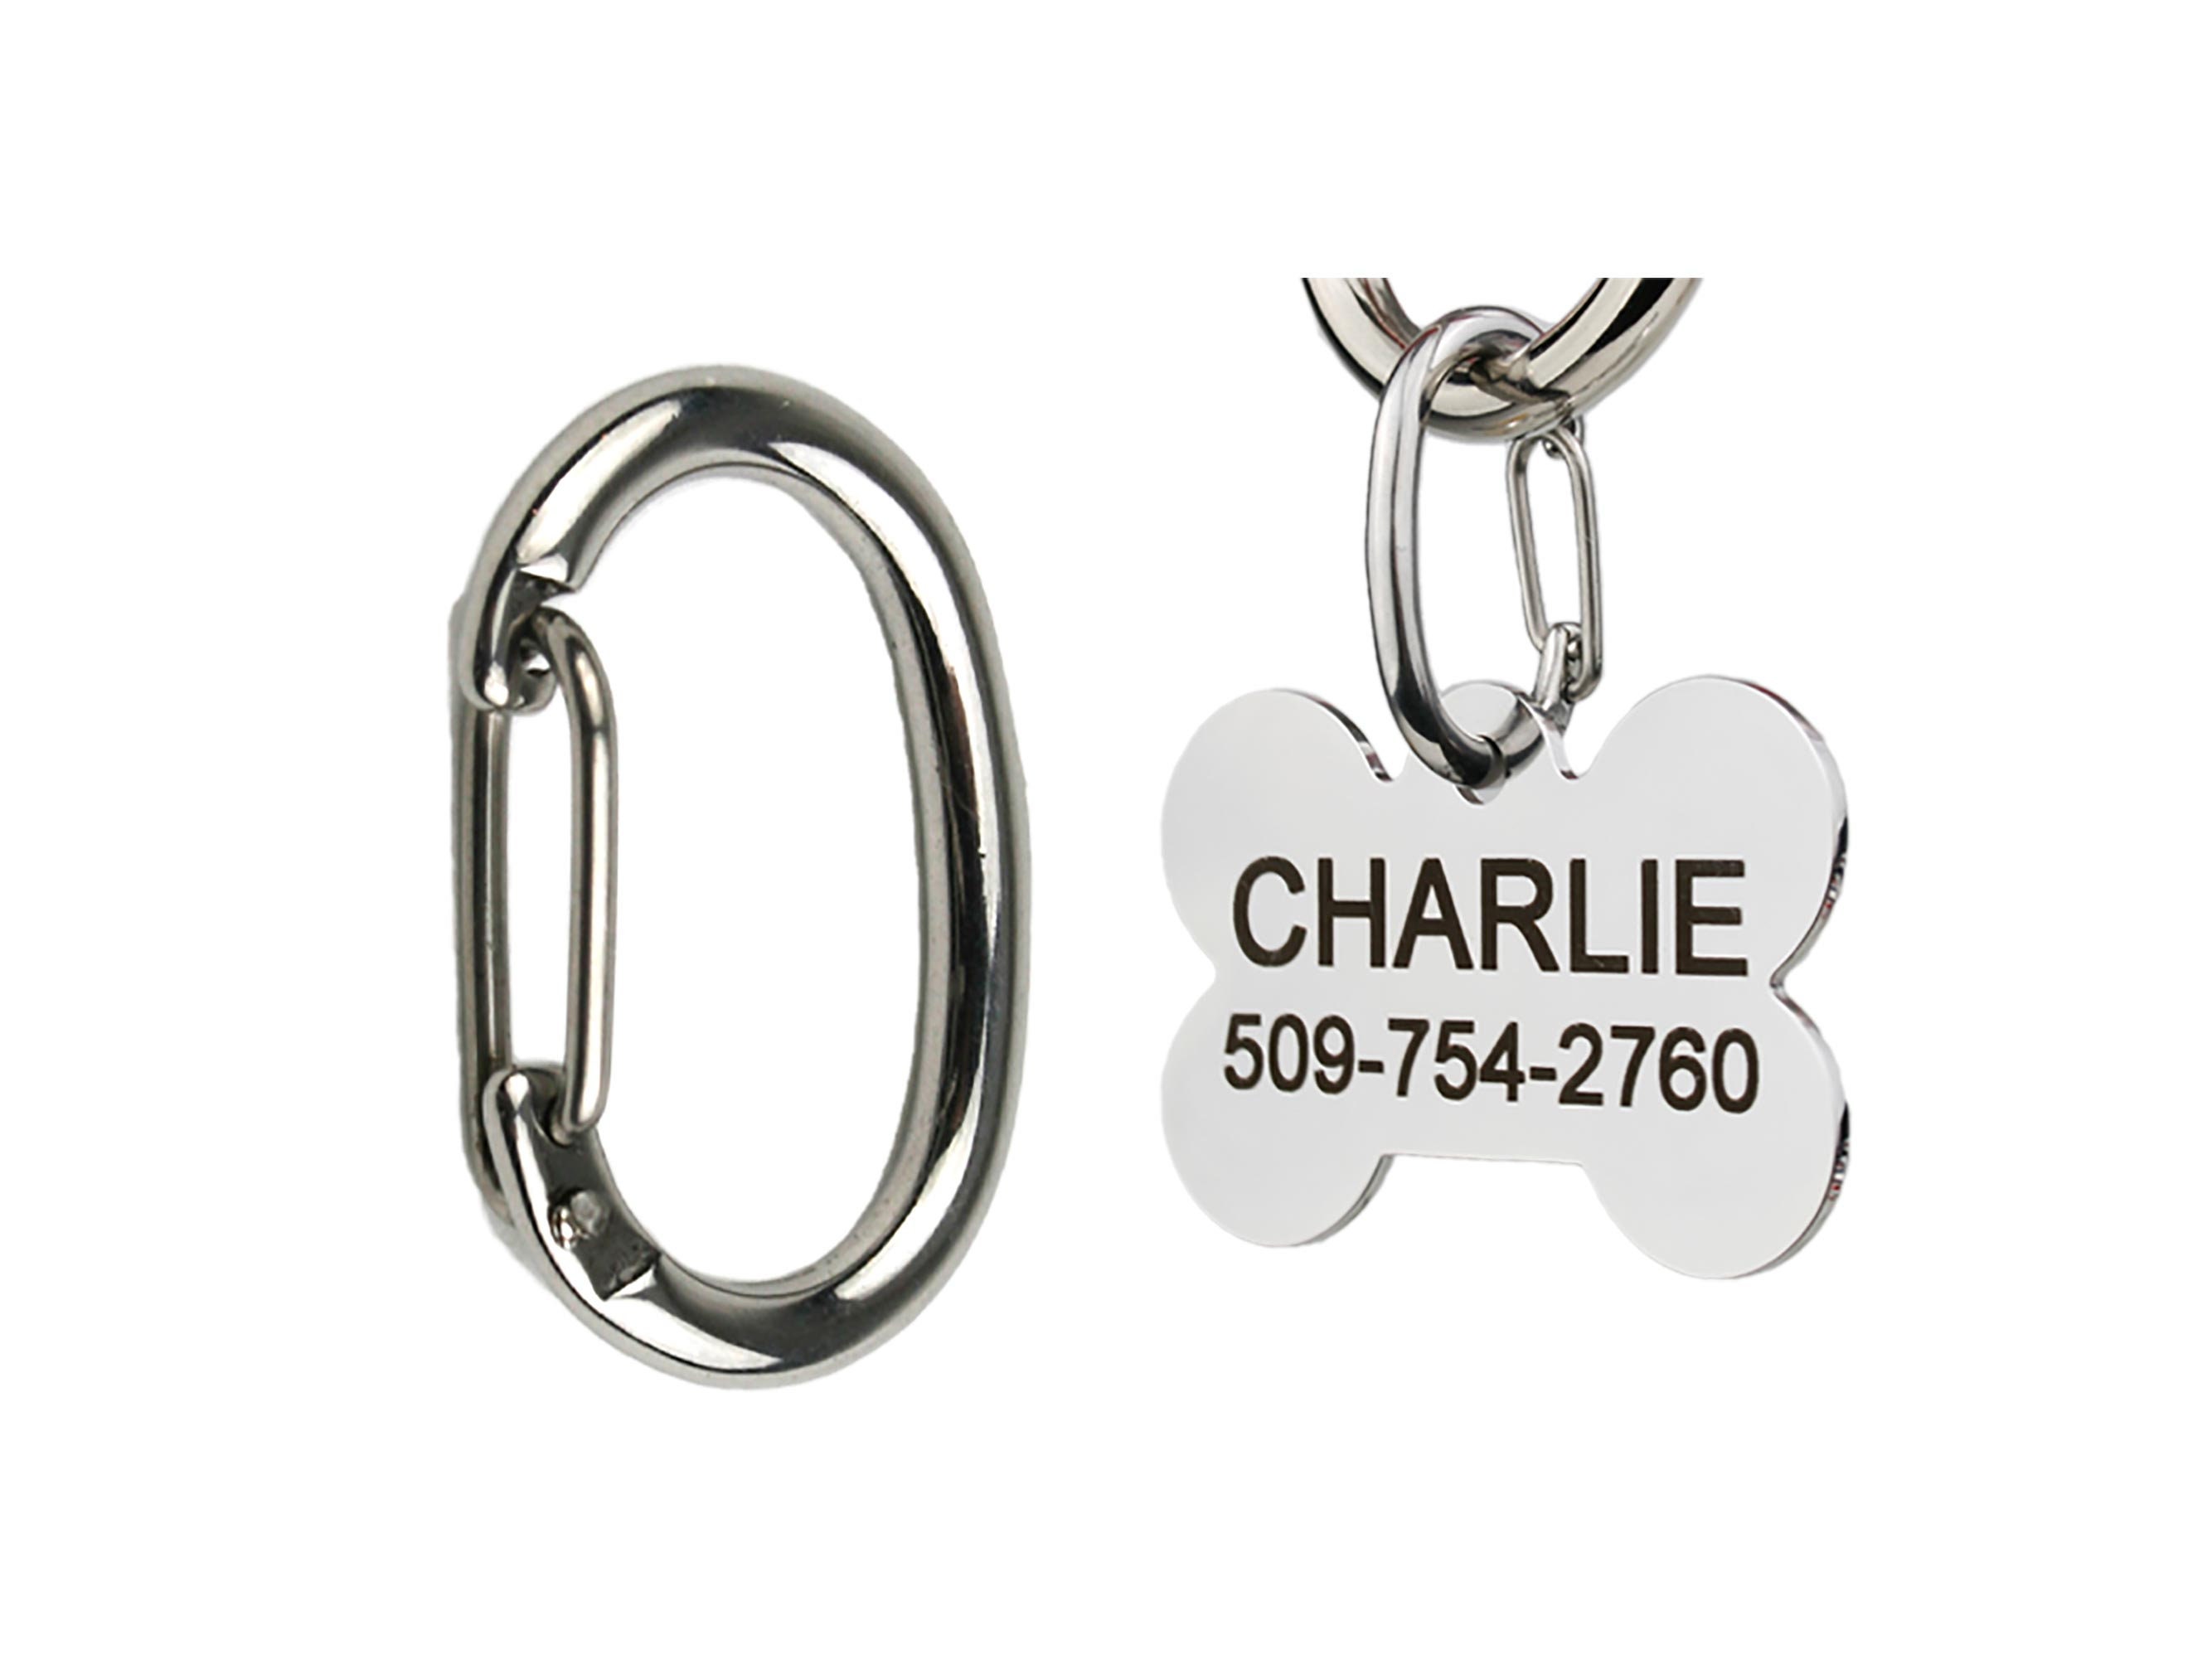 Ctmw 2 Pack Dog Tag Clips, Stainless Steel Heavy Duty Quick Clips